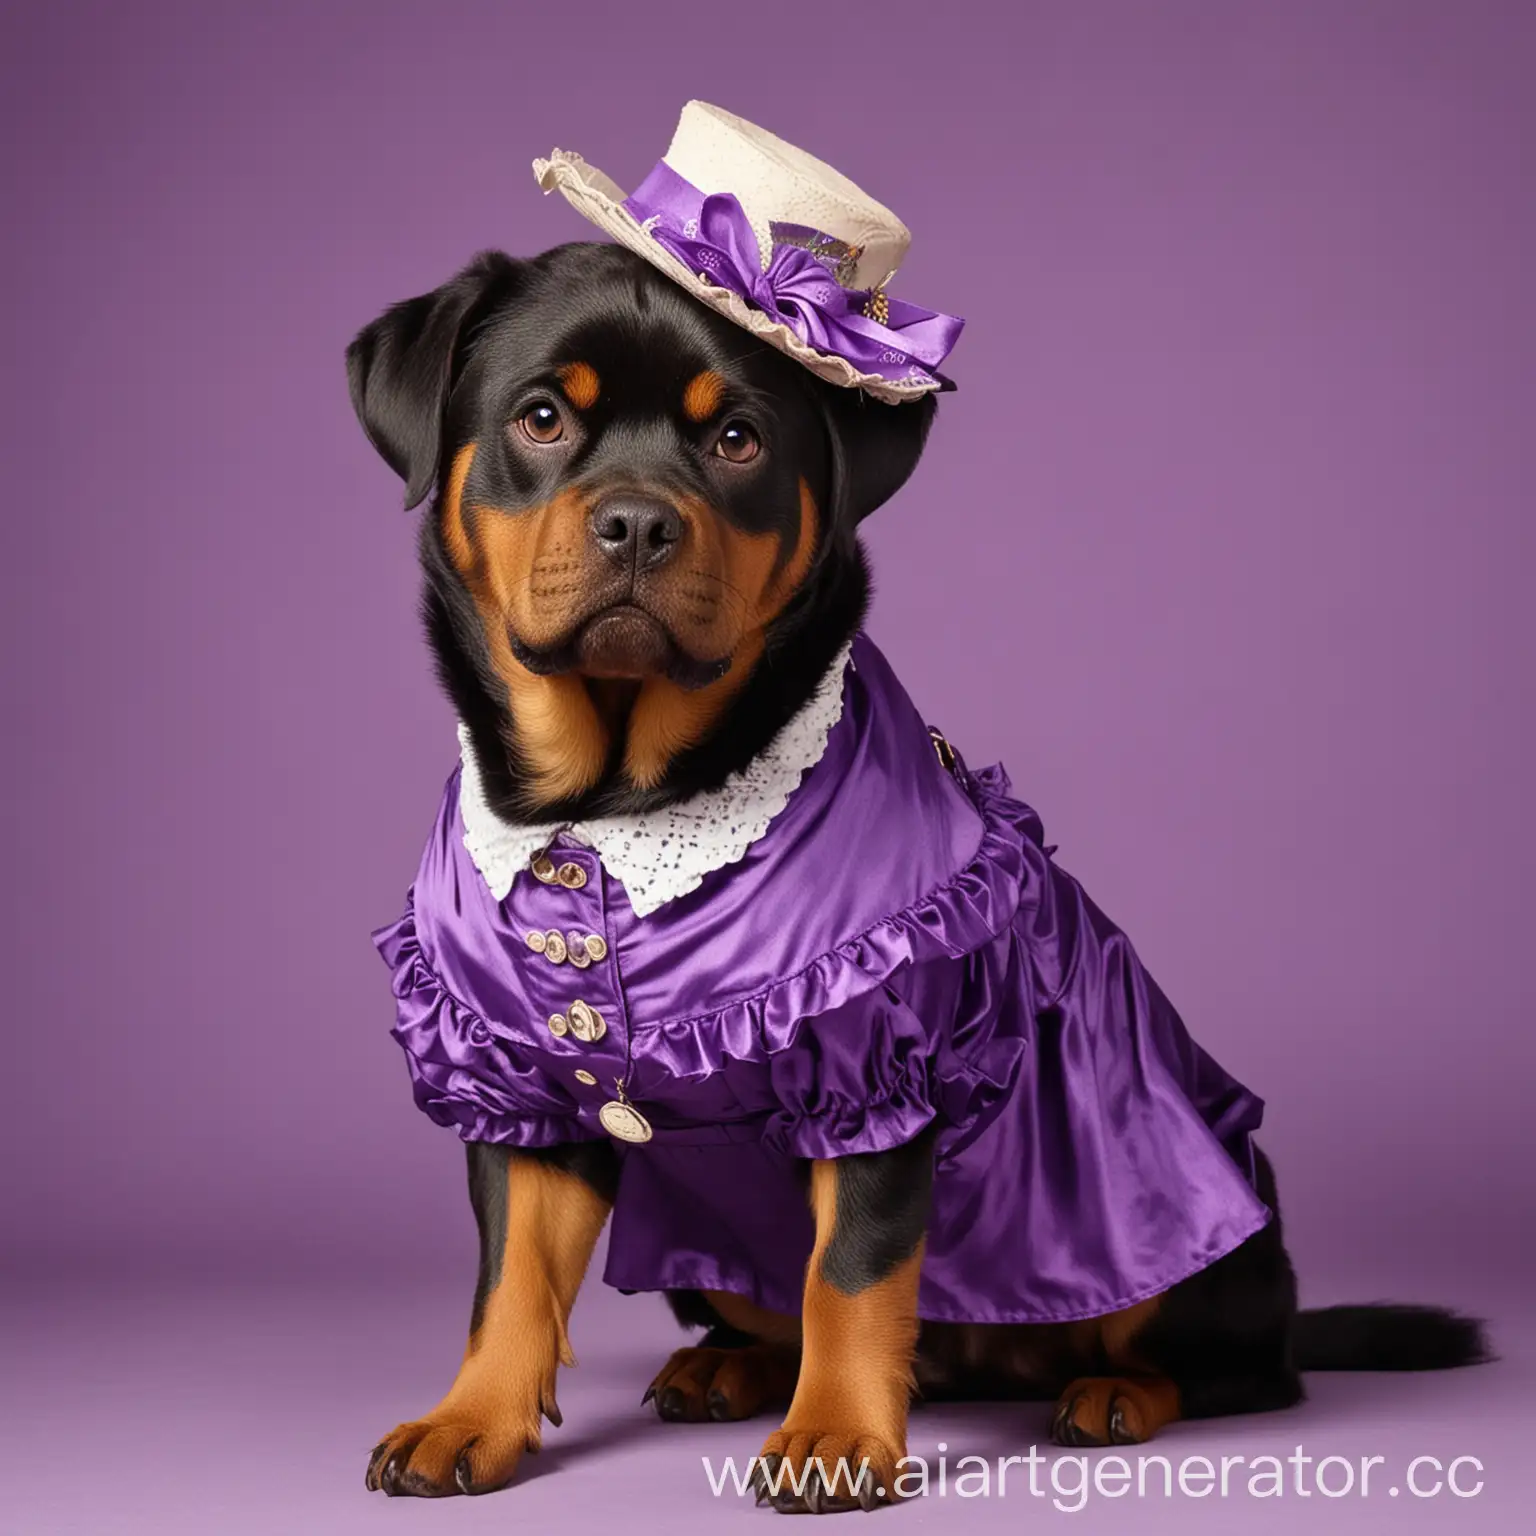 Fashionable-Rottweiler-Dog-in-Purple-Dress-with-Monocle